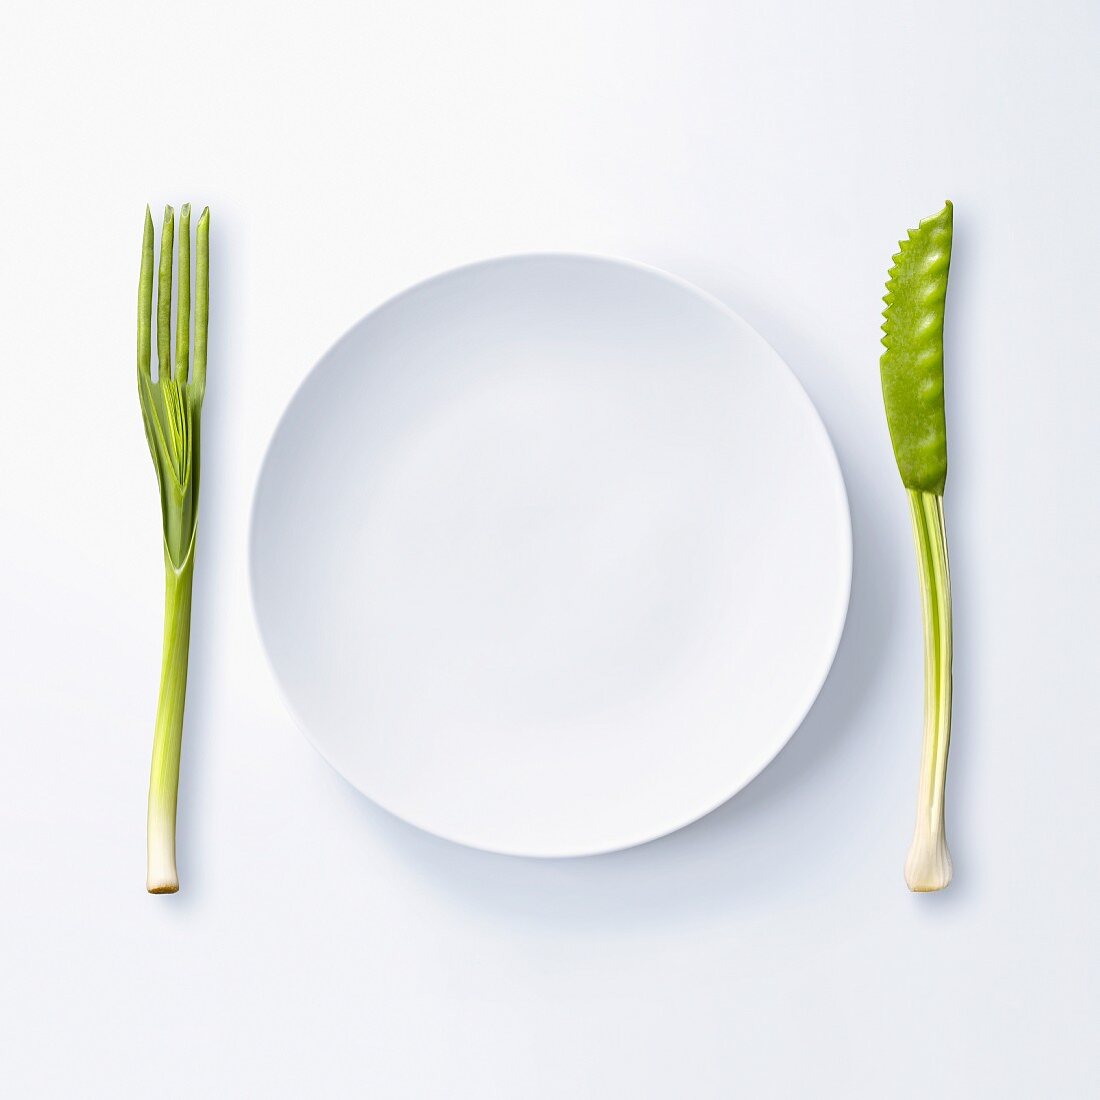 Empty plate and knife and fork made out of green vegetables